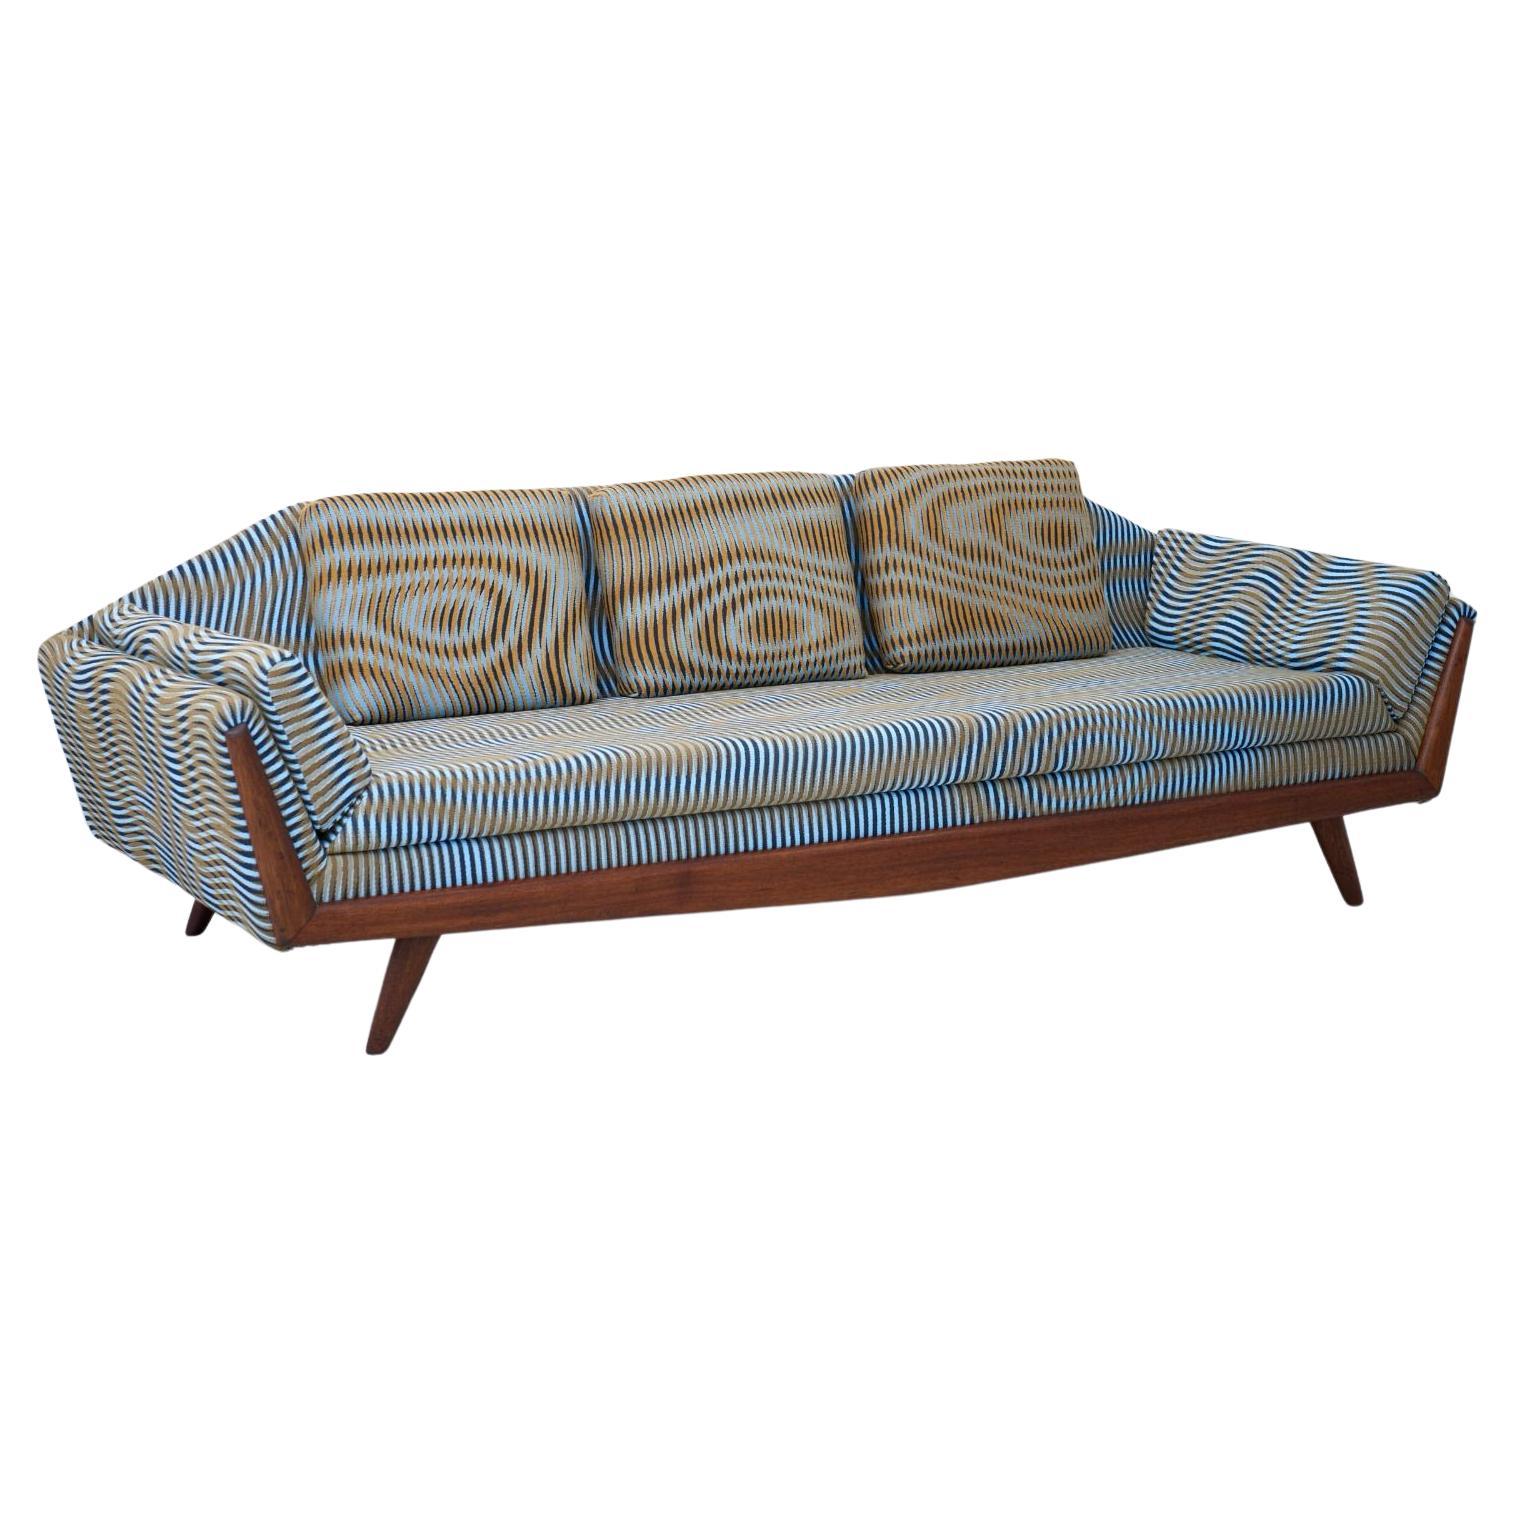 This beautiful sofa is newly upholstered in a custom fabric by Berlin based textile studio Case Studies. Sculpted wooden legs and cutaway seat back add to the appeal of this sculptural 